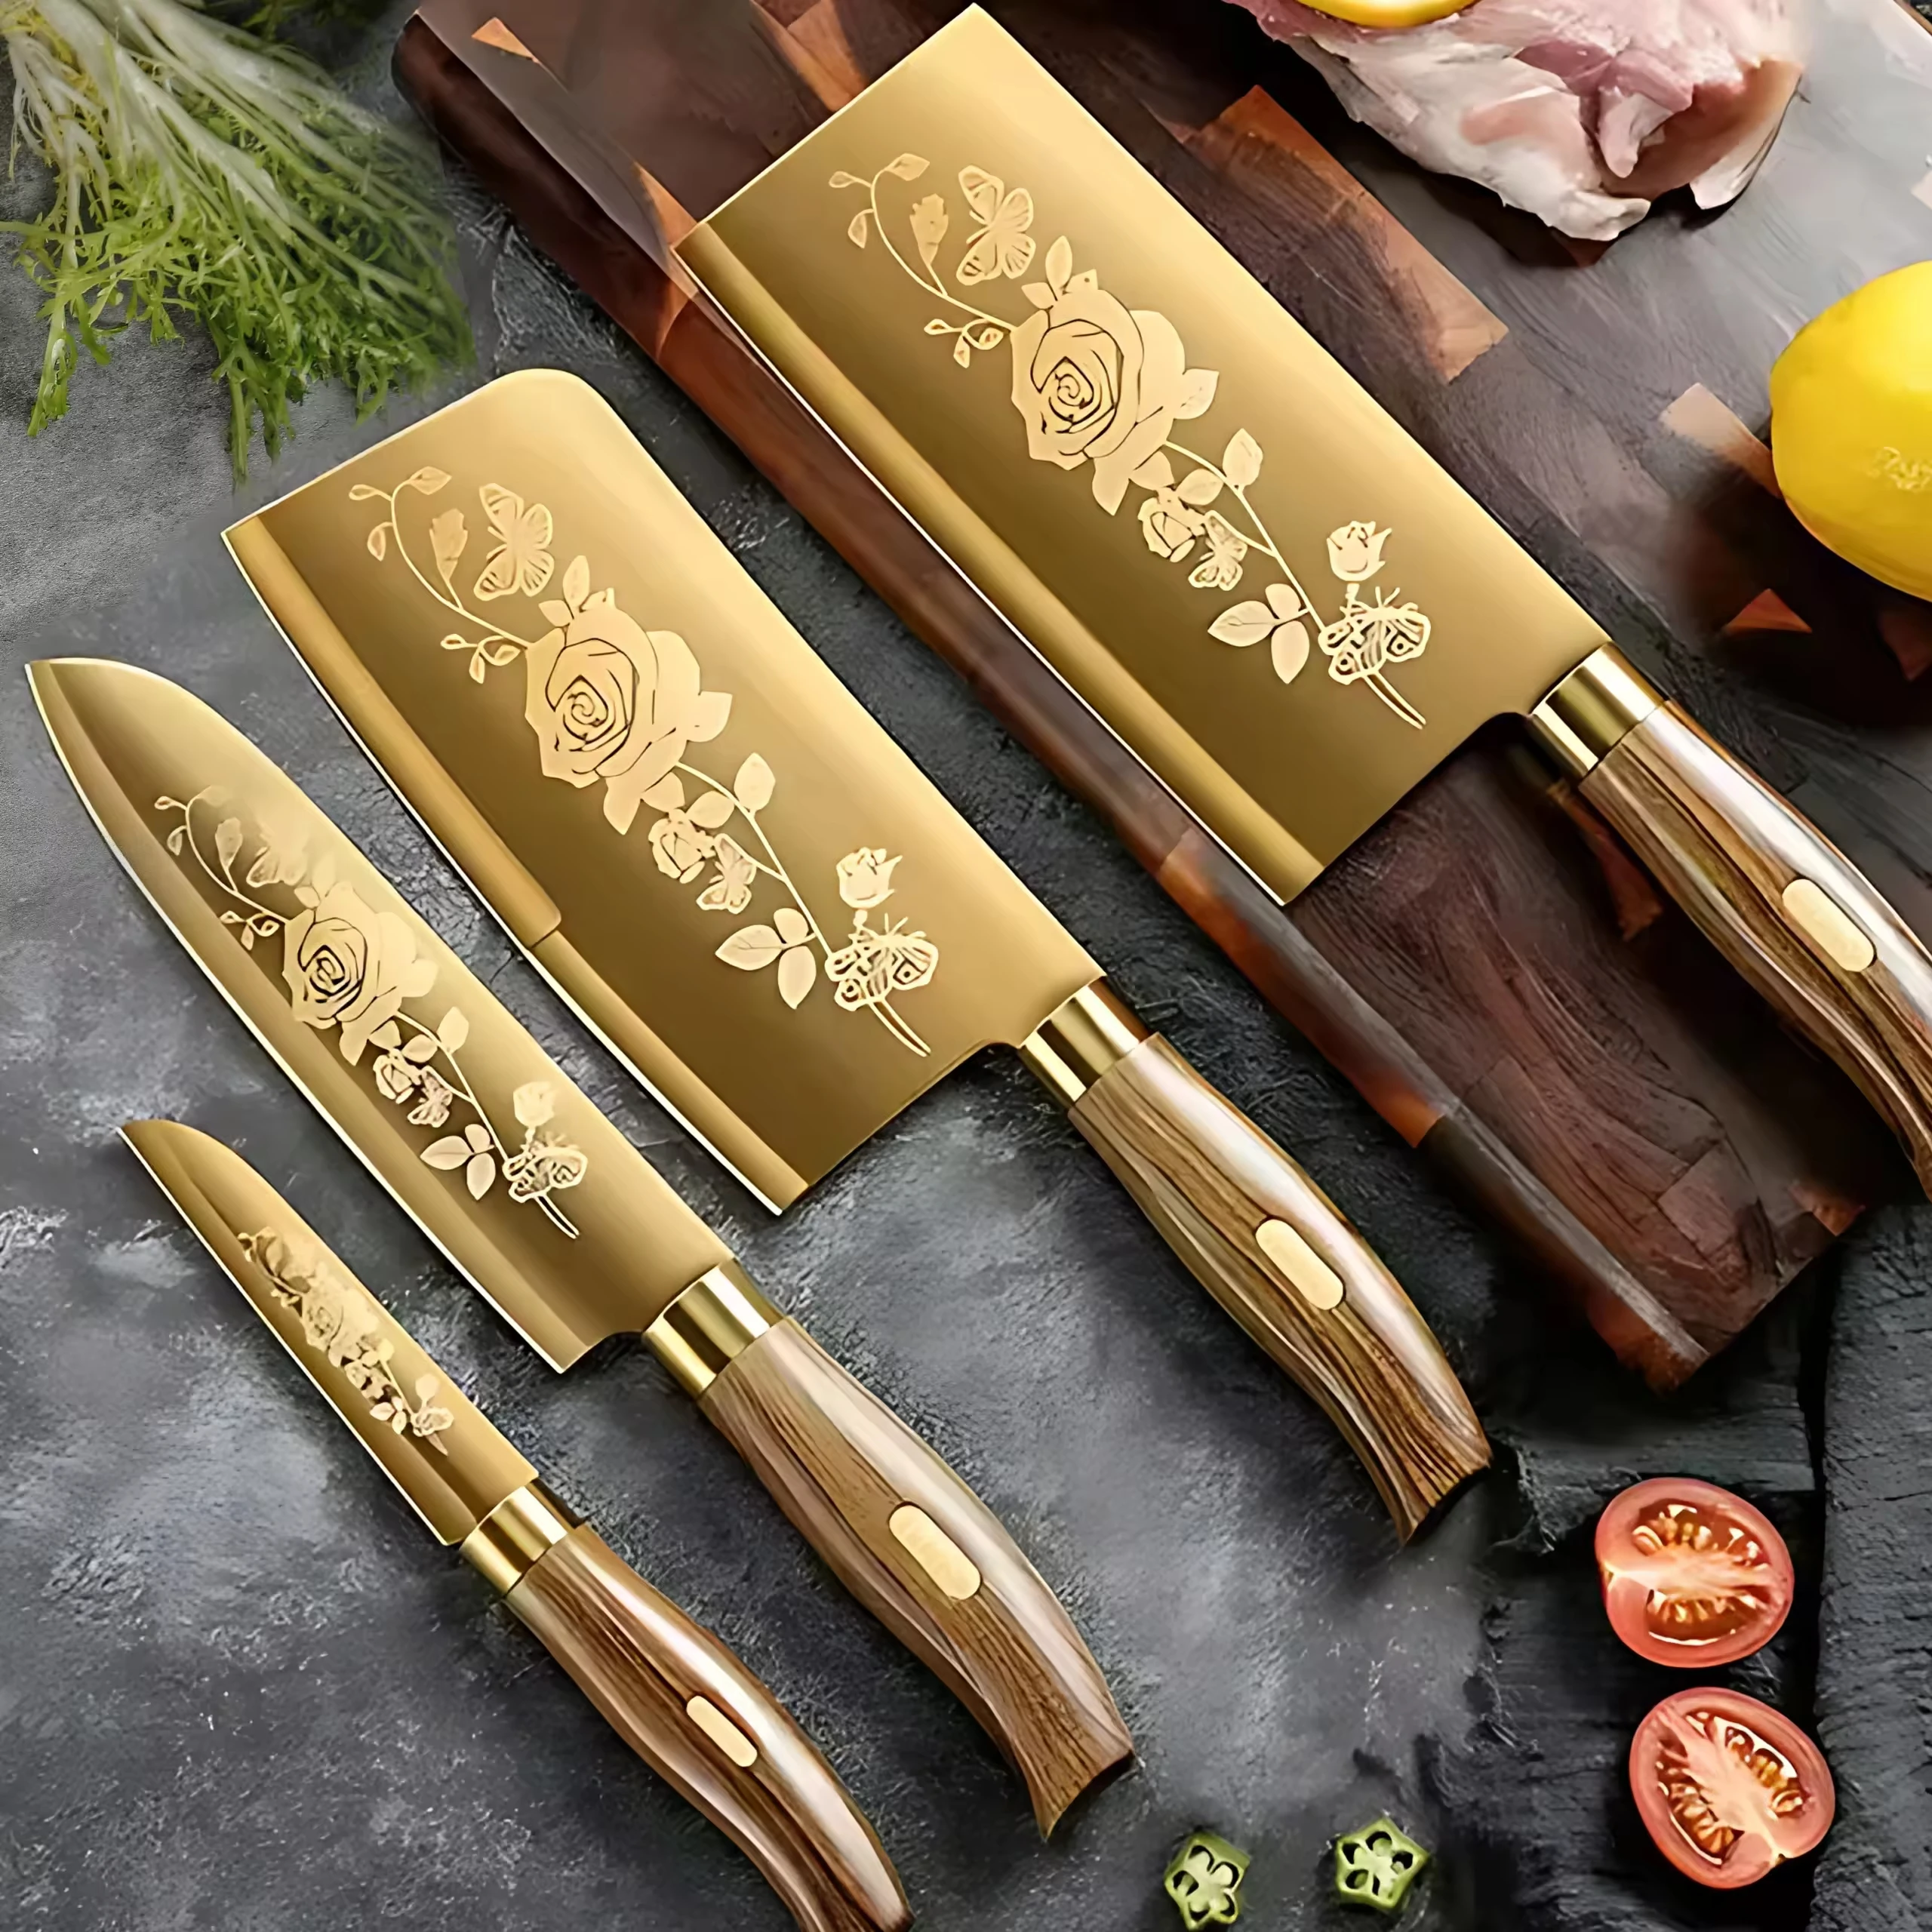 Golden Stainless Steel Household Bone-Chopping Slicing Chef Cooking Tools Kitchen Knife Set Accessories Fruit & Vegetable Tools